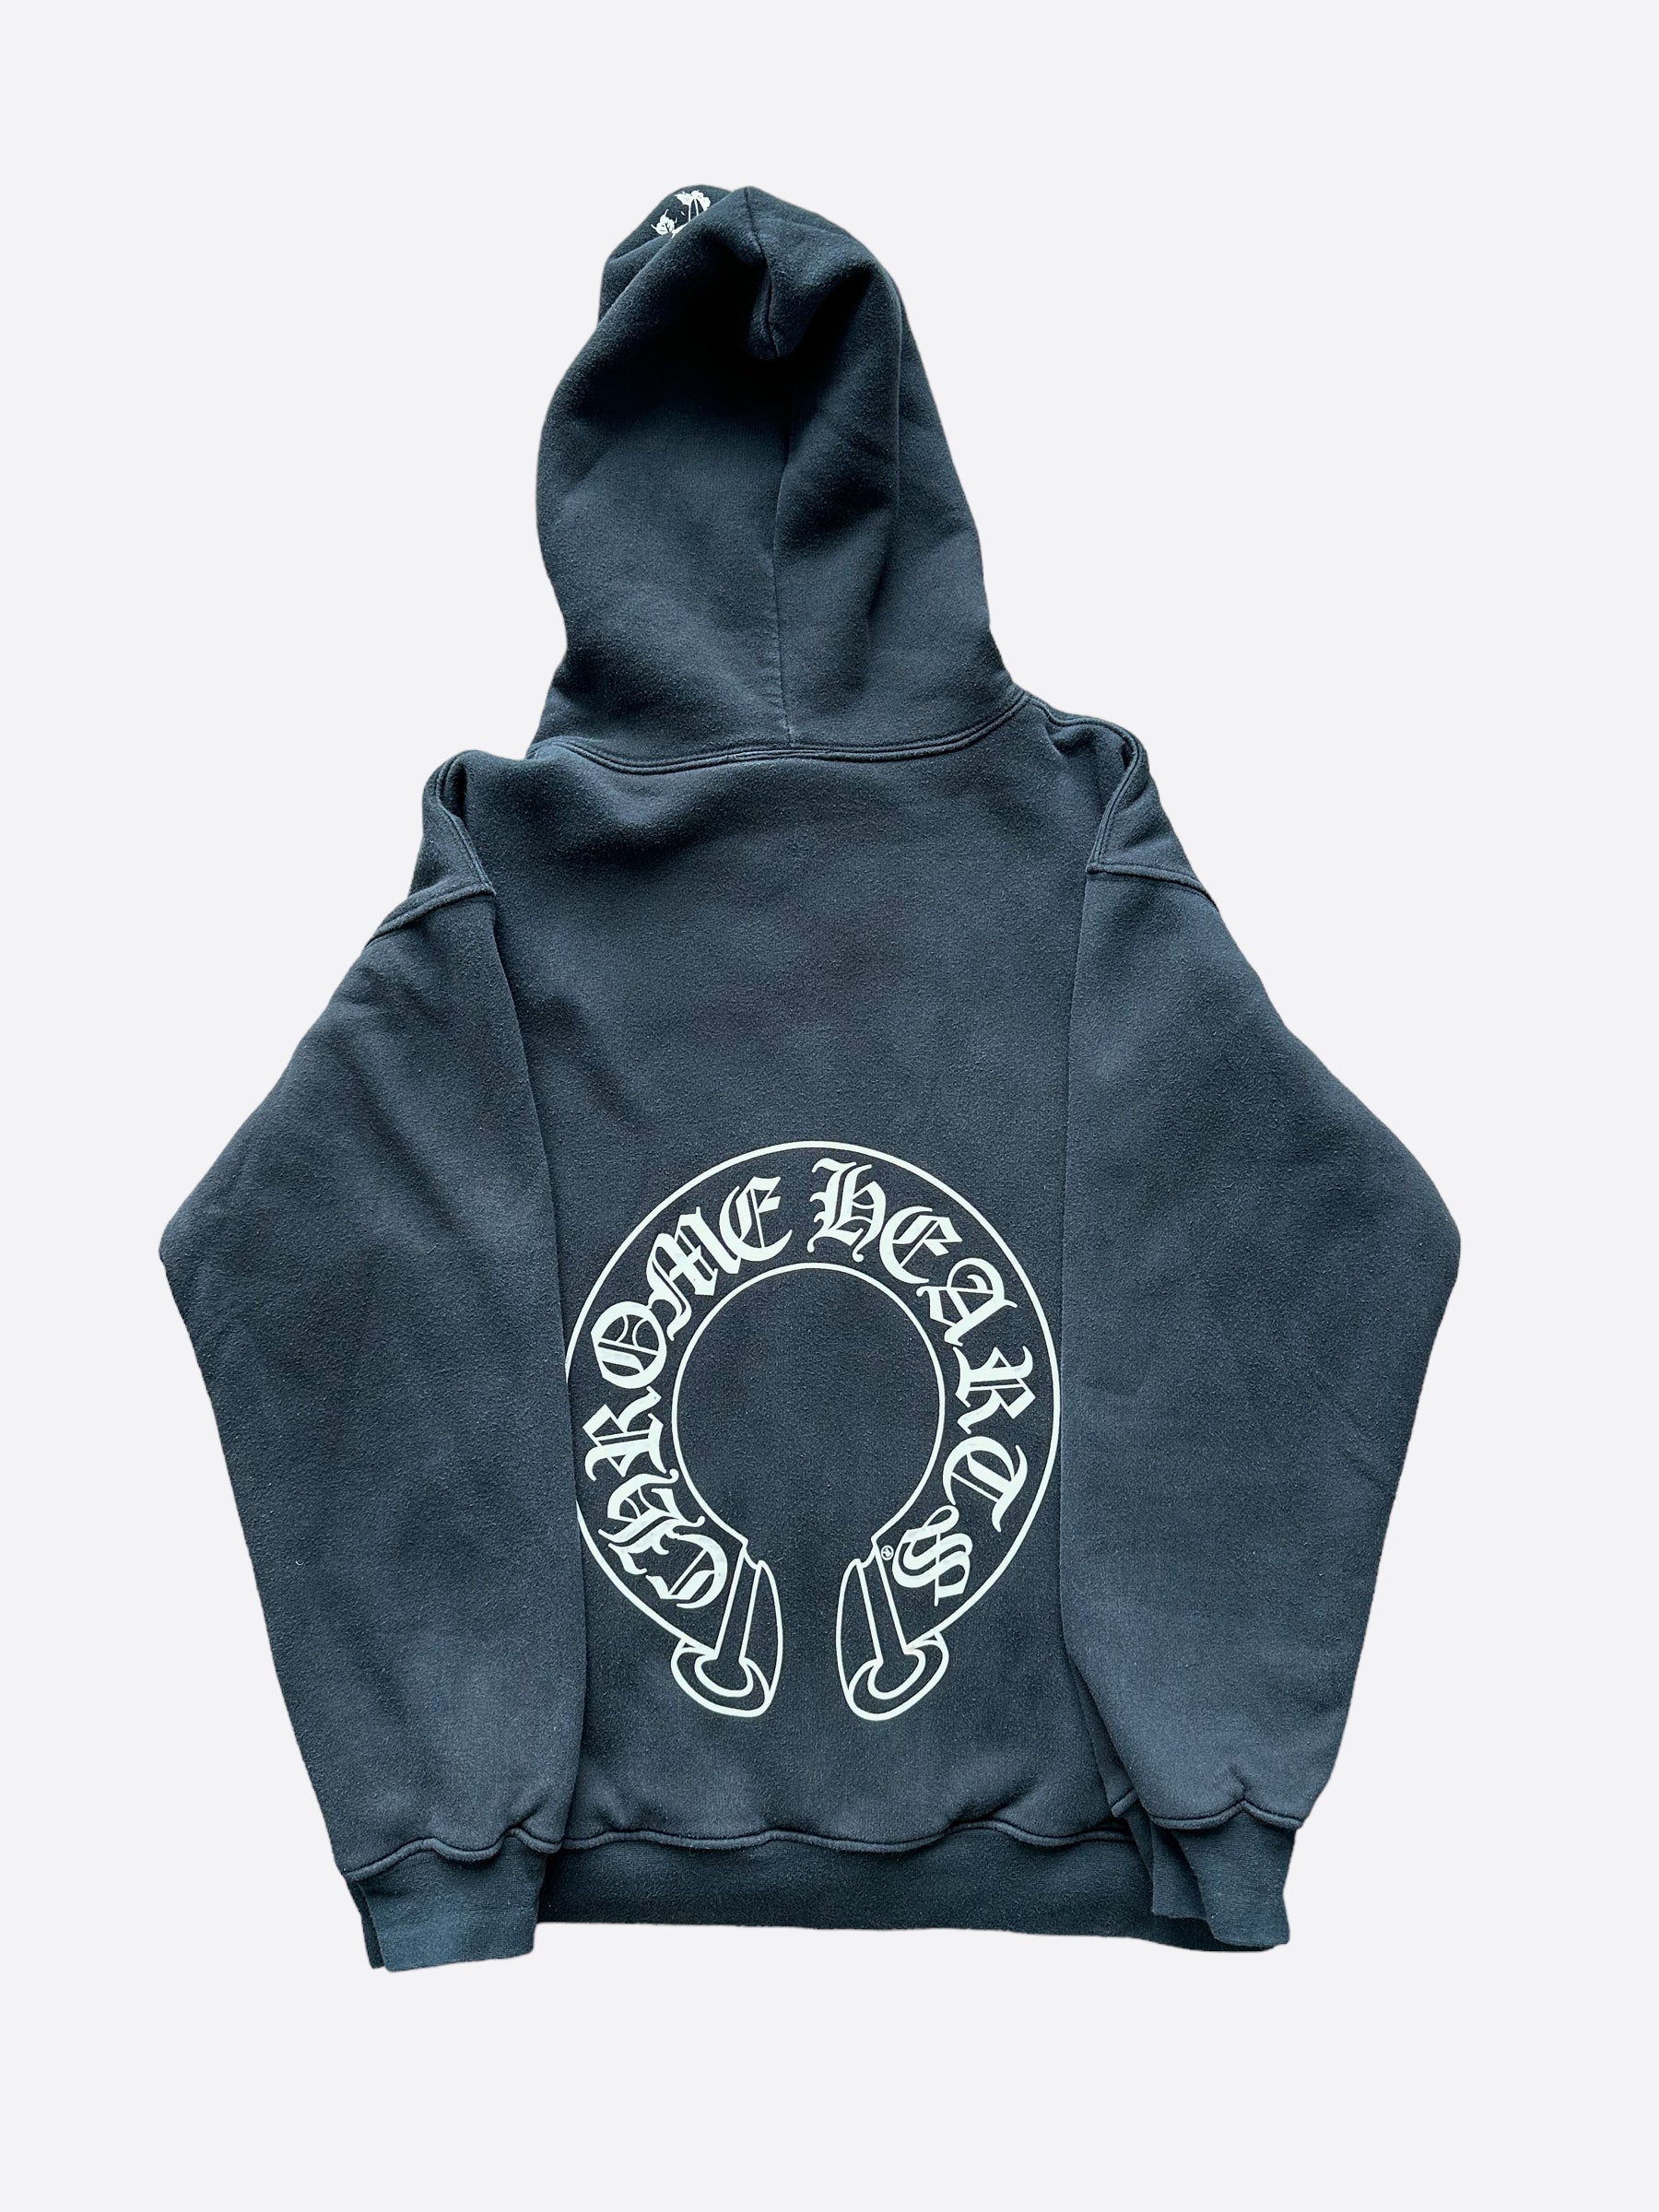 Chrome Hearts Thermal Lined Horseshoe Zip Up Hoodie